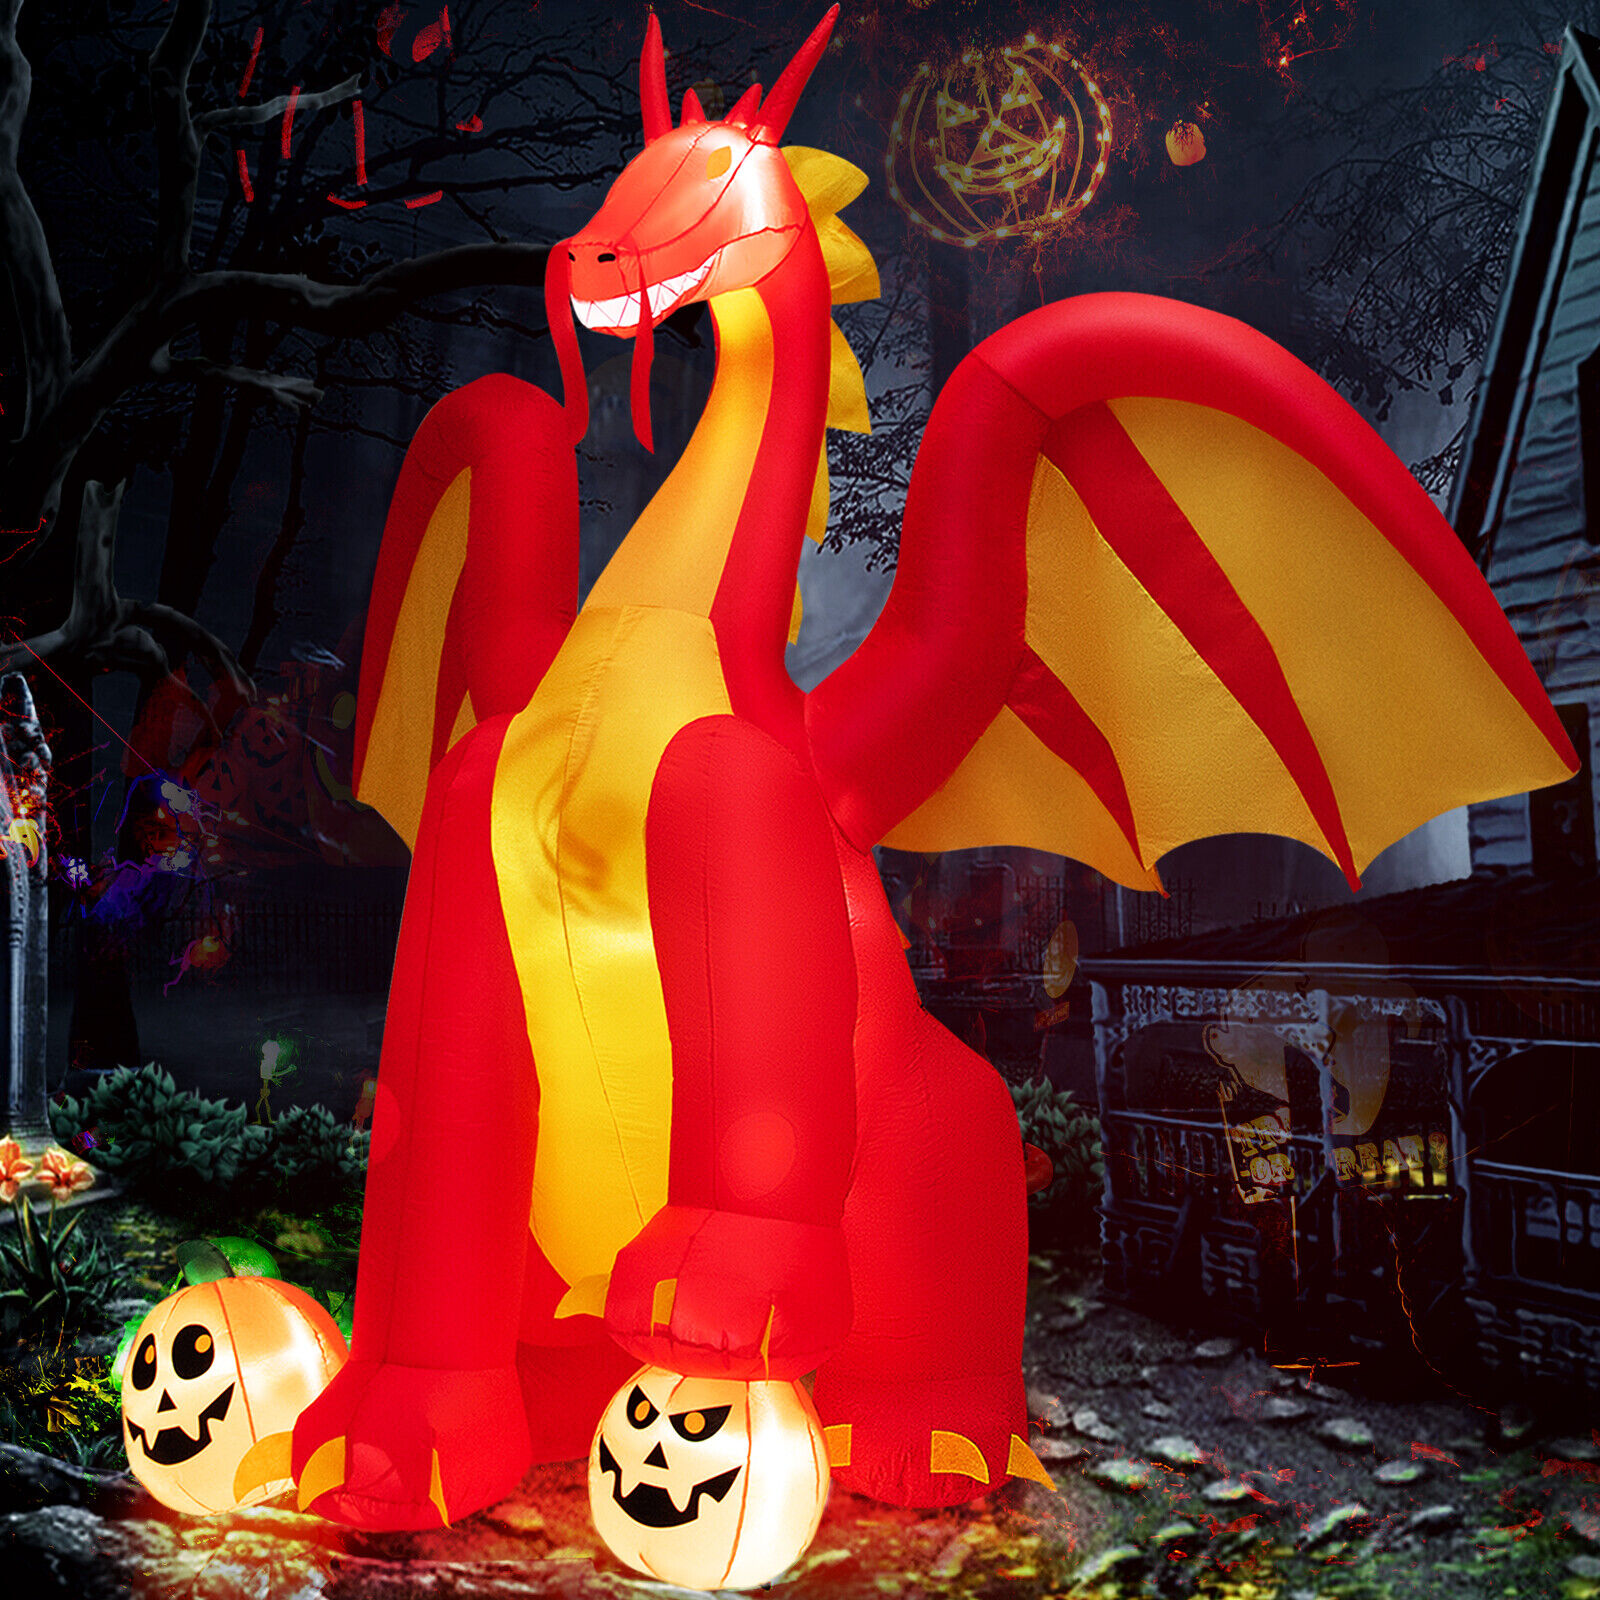 10 FT Inflatable Giant Animated Fire Dragon Outdoor Halloween Decor w/Lights